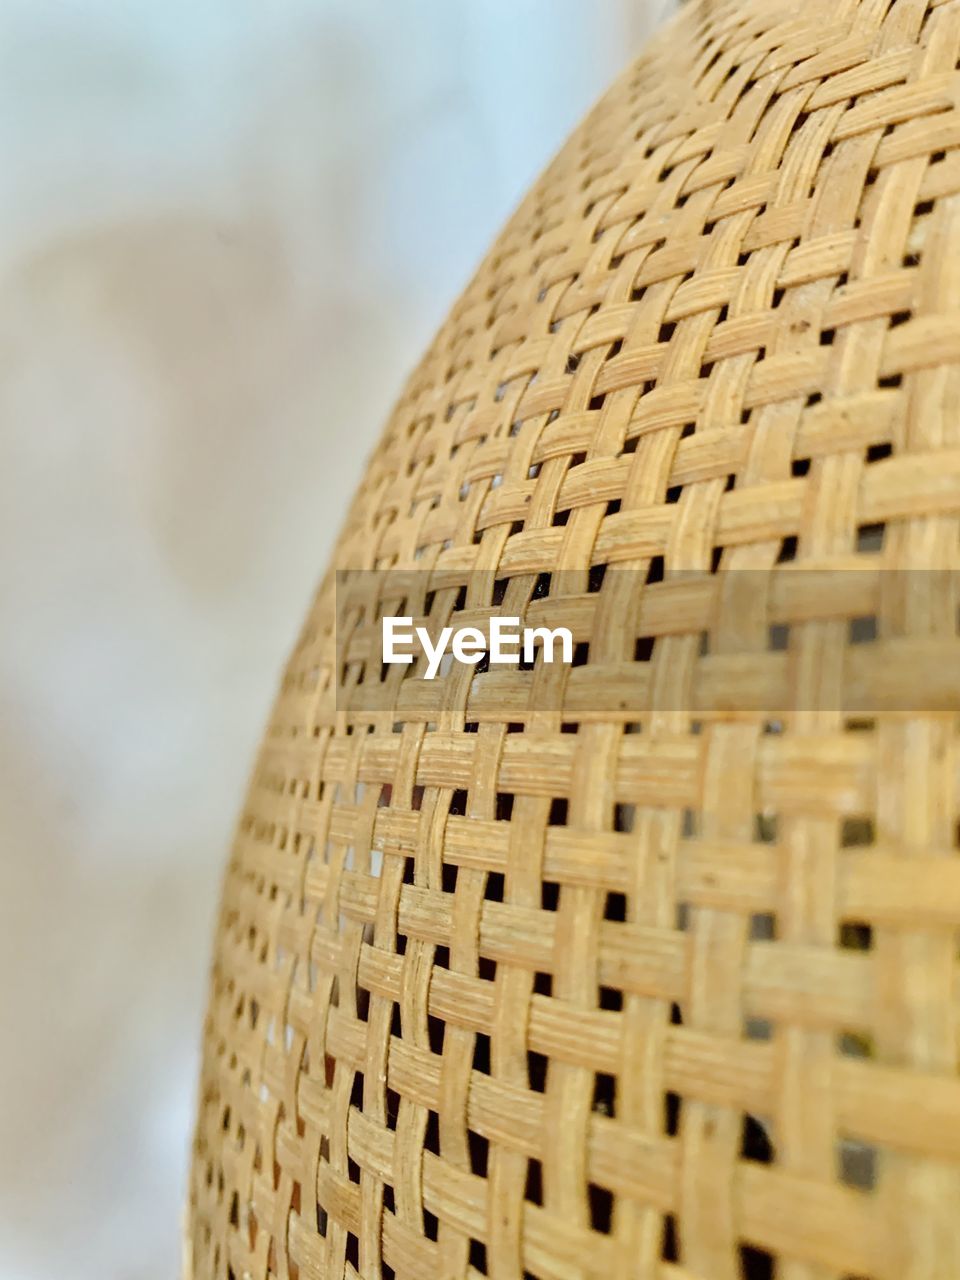 CLOSE-UP OF WICKER BASKET ON WOOD